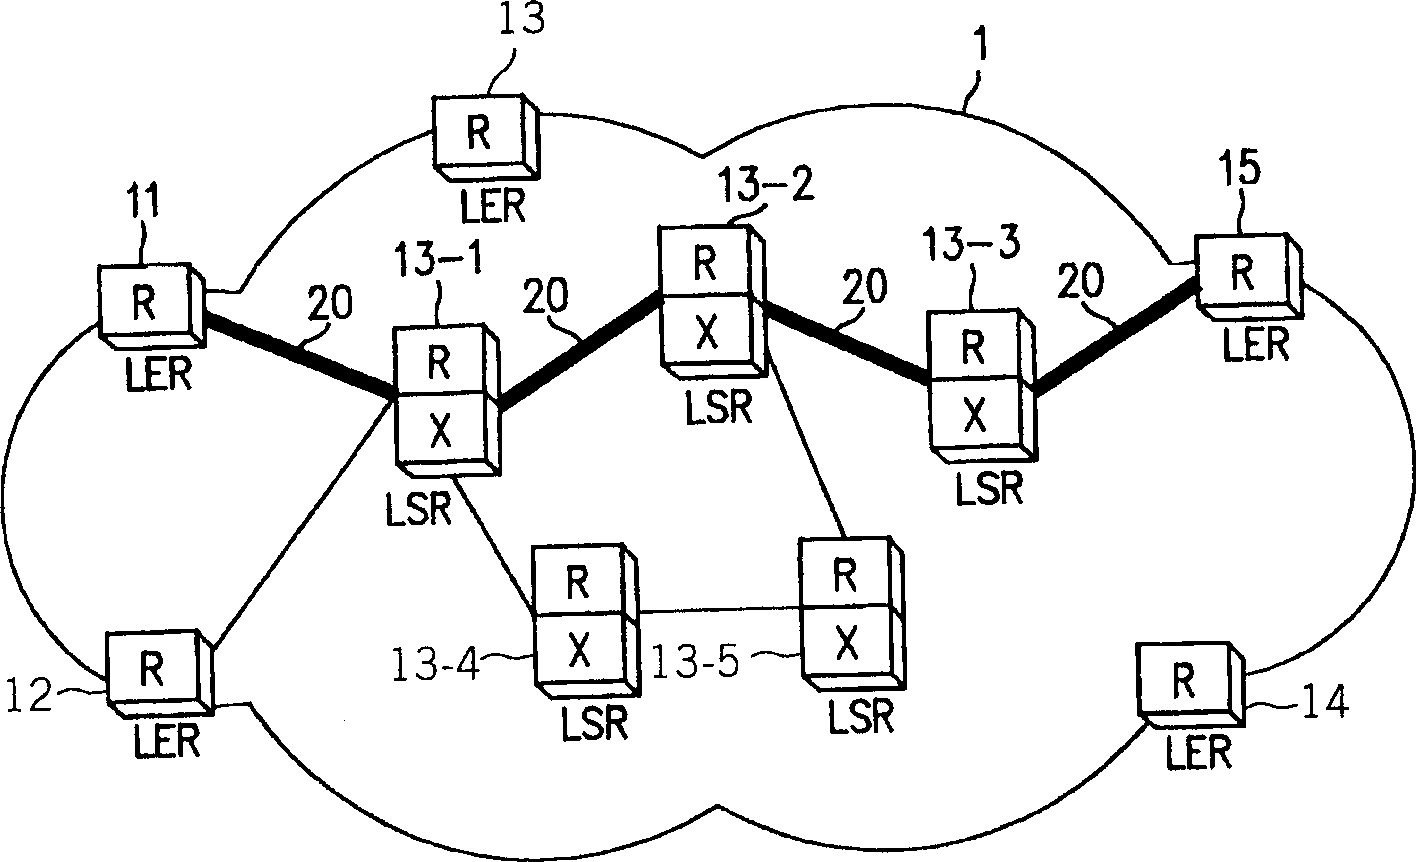 Data structure and storage medium for realizing multi-protocol habel exchange system engineering